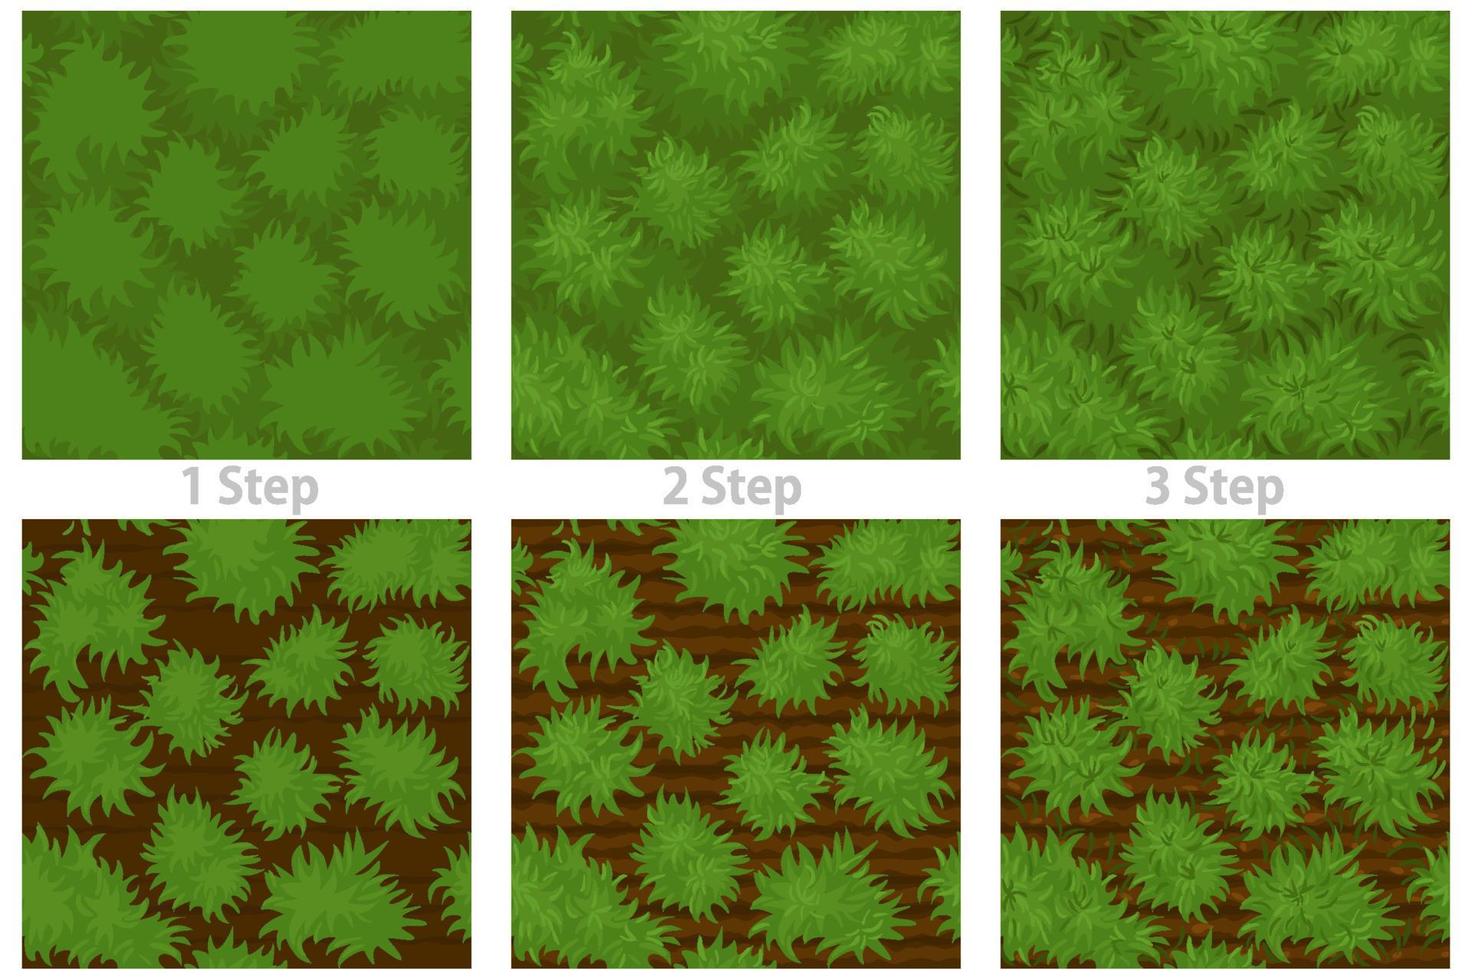 Seamless grass pattern, drawing step by step wallpaper texture. Vector illustration